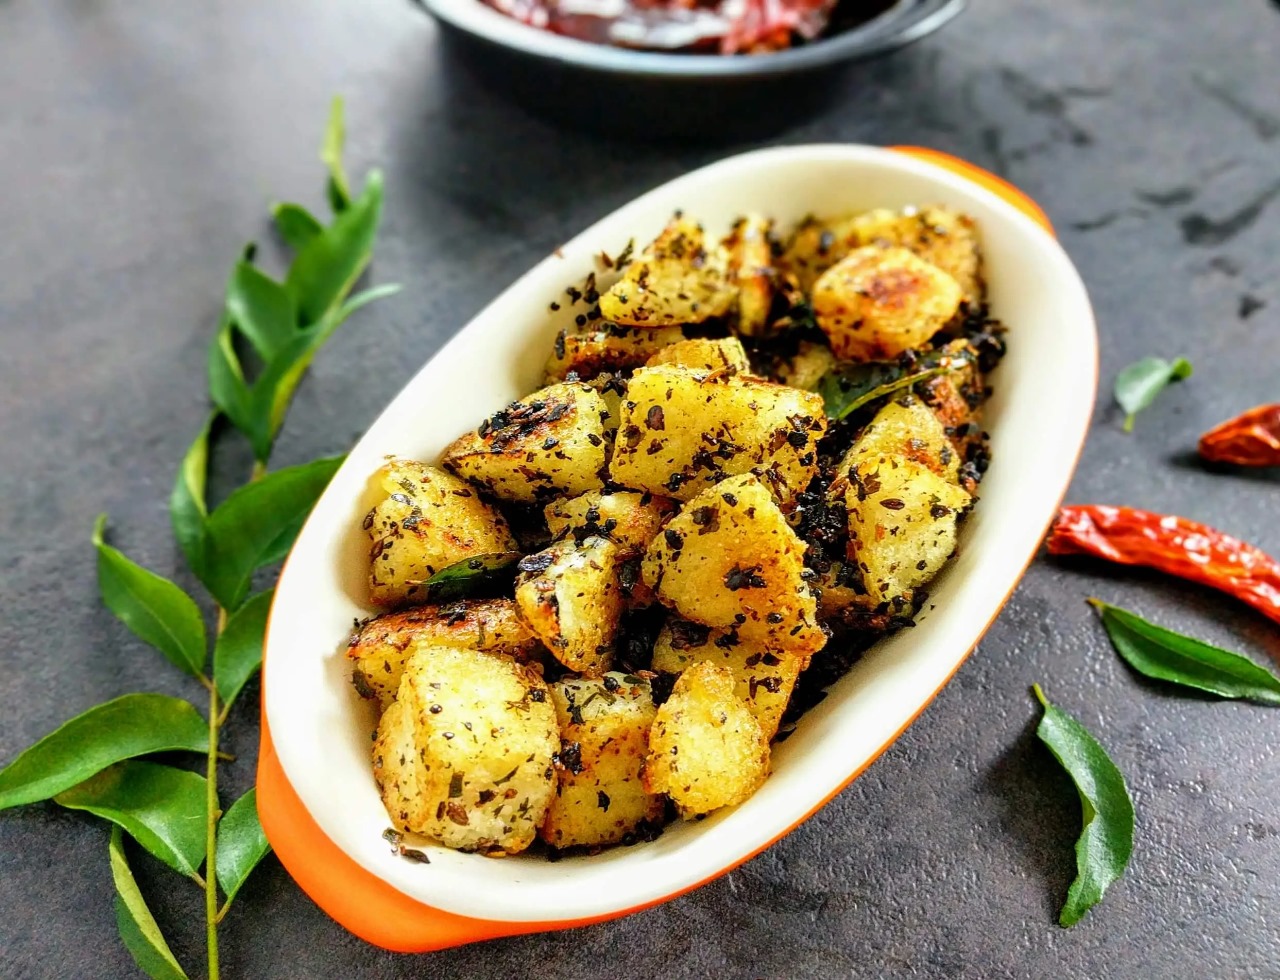 Spot idli is prepared by adding onions and tomatoes, you can also try this viral recipe